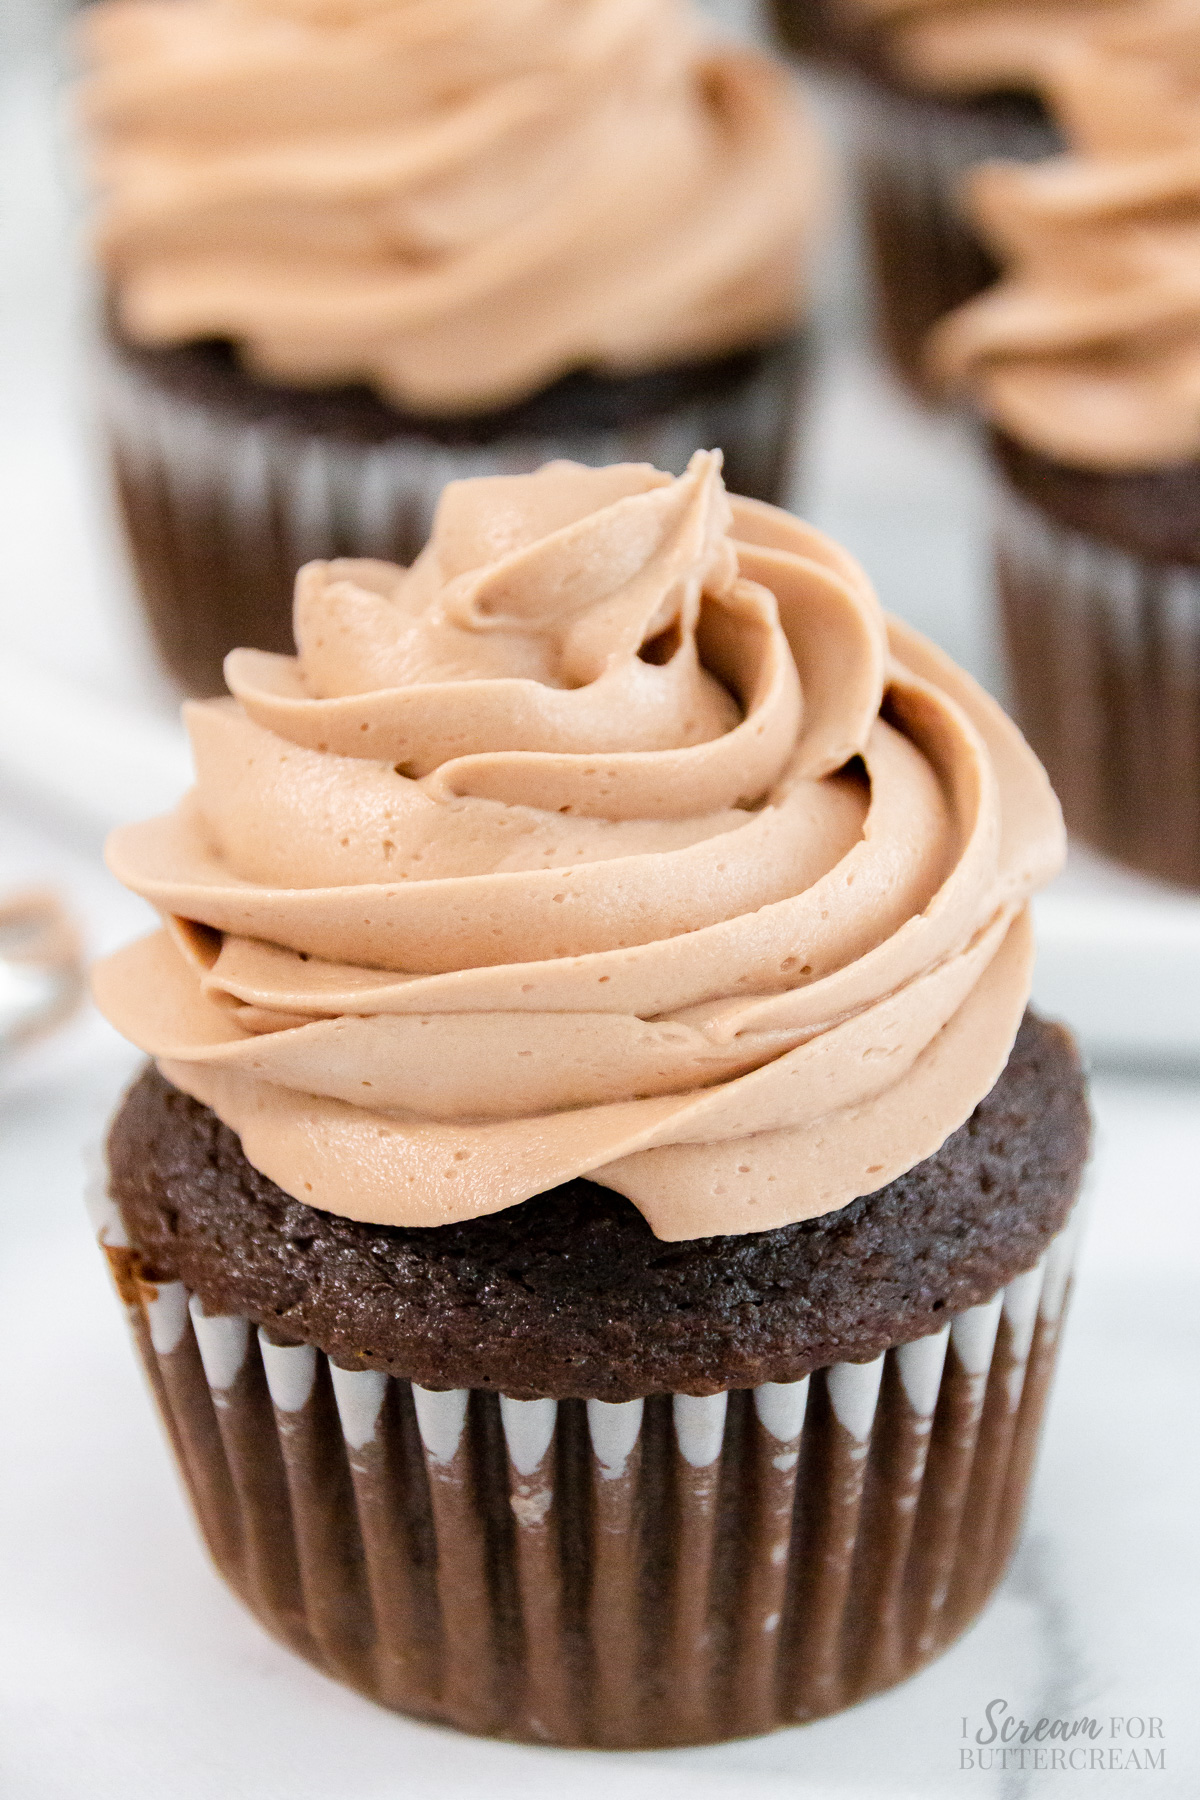 Close up of milk chocolate frosting on a chocolate cupcake.